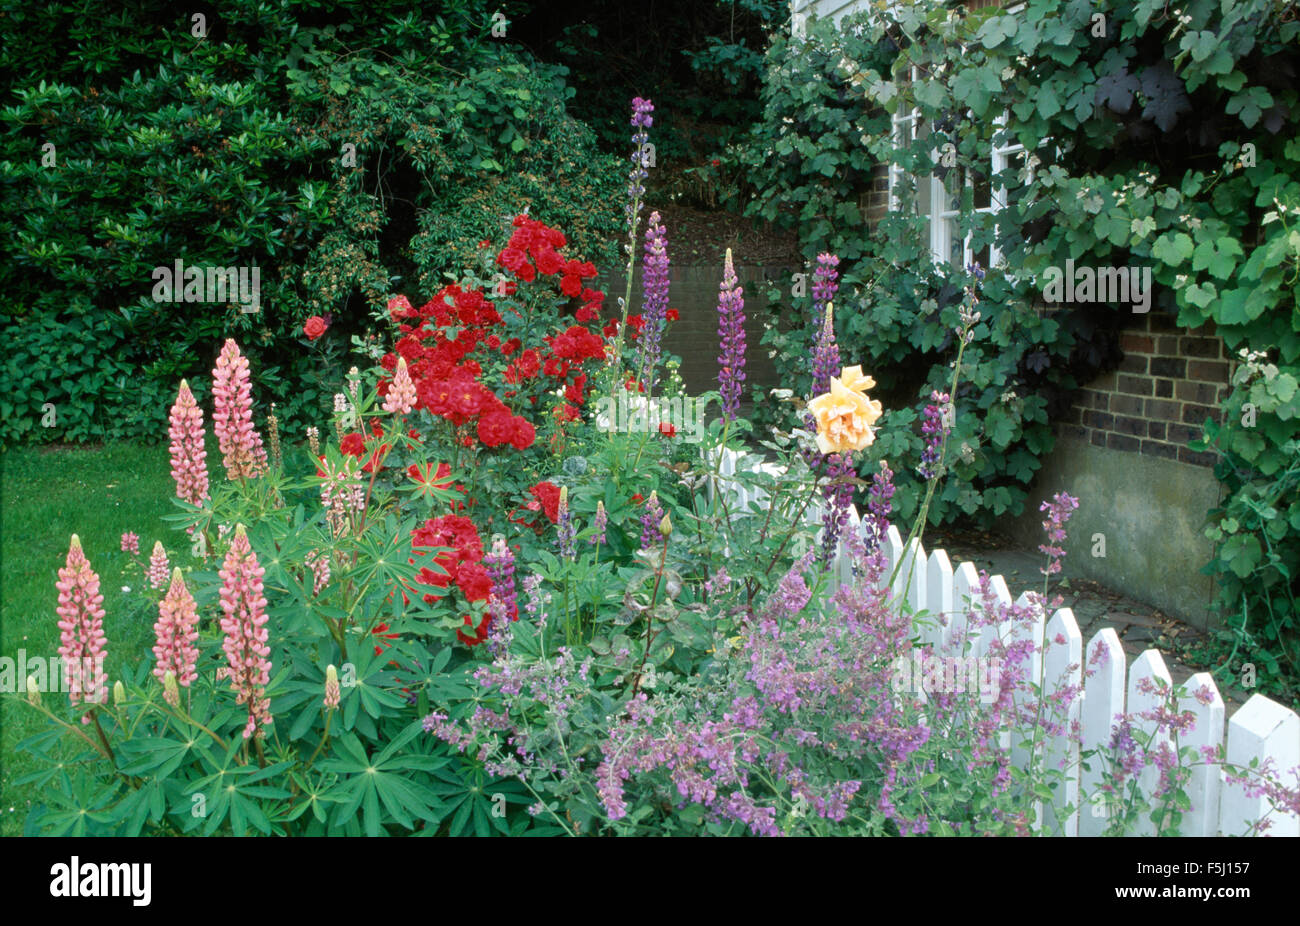 Pink lupins and red roses with blue nepeta in summer border against a white picket fence Stock Photo